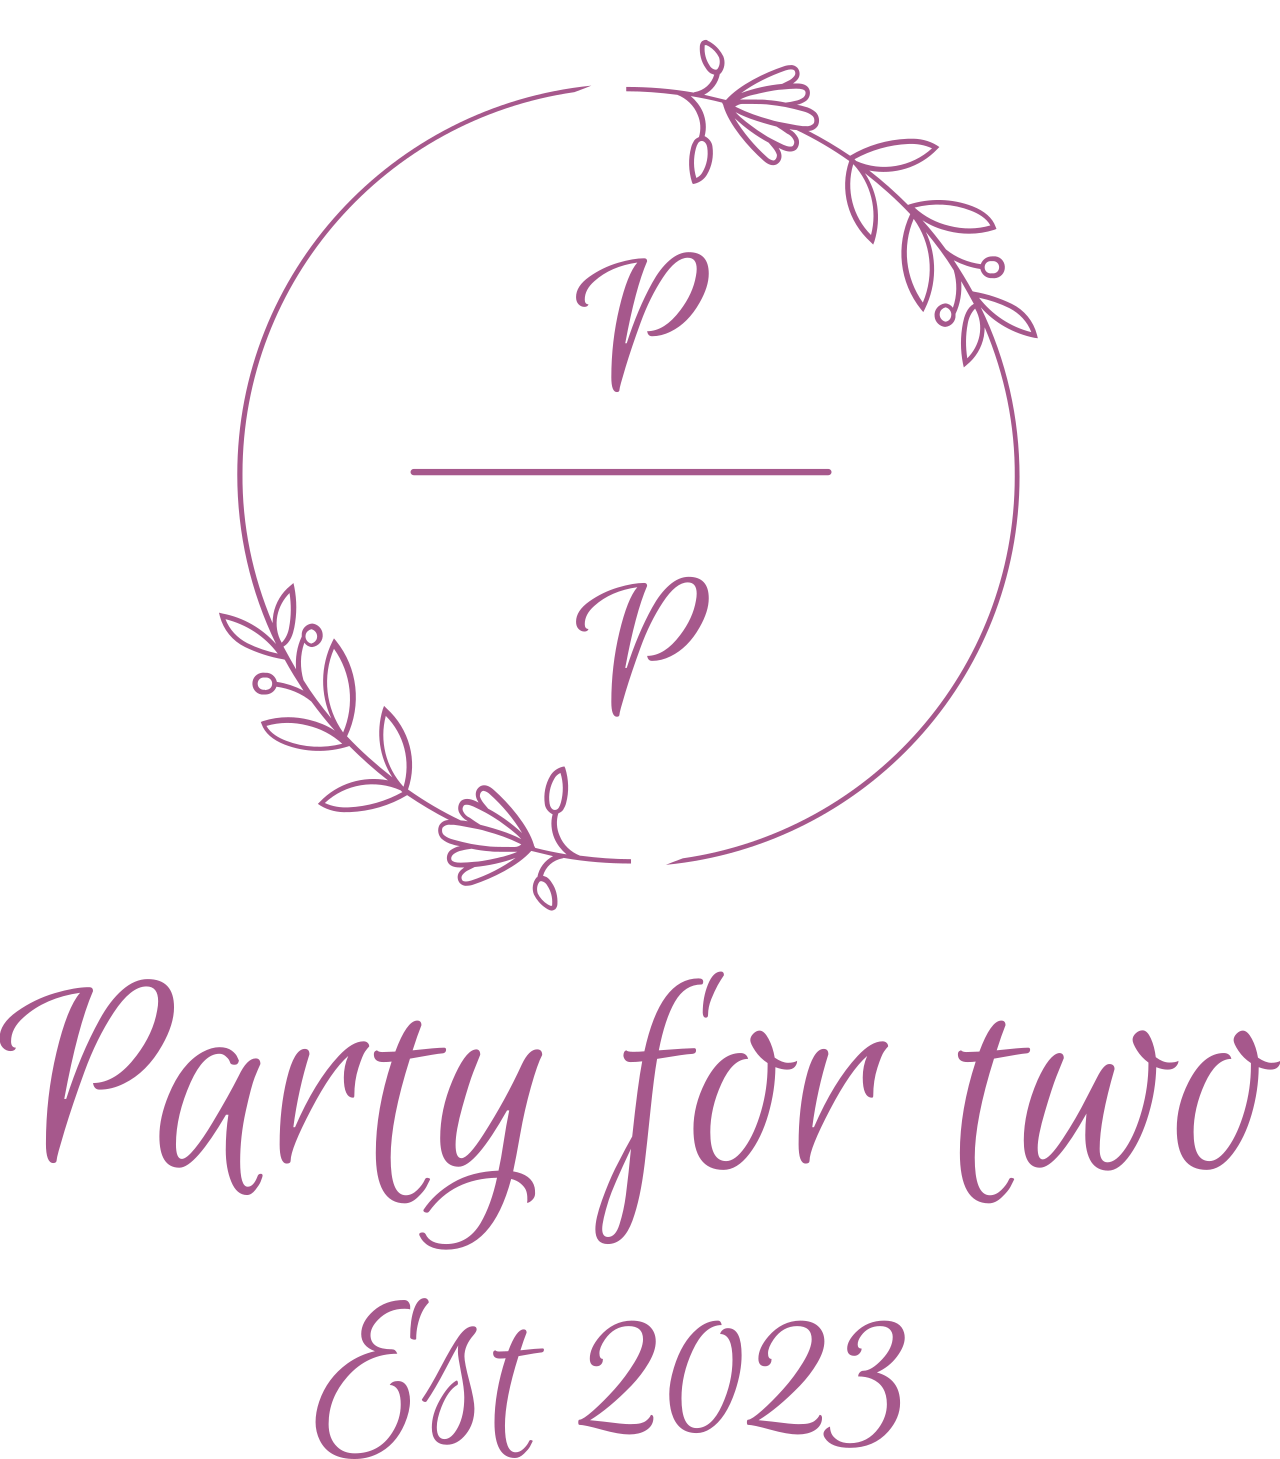 Party for two's web page